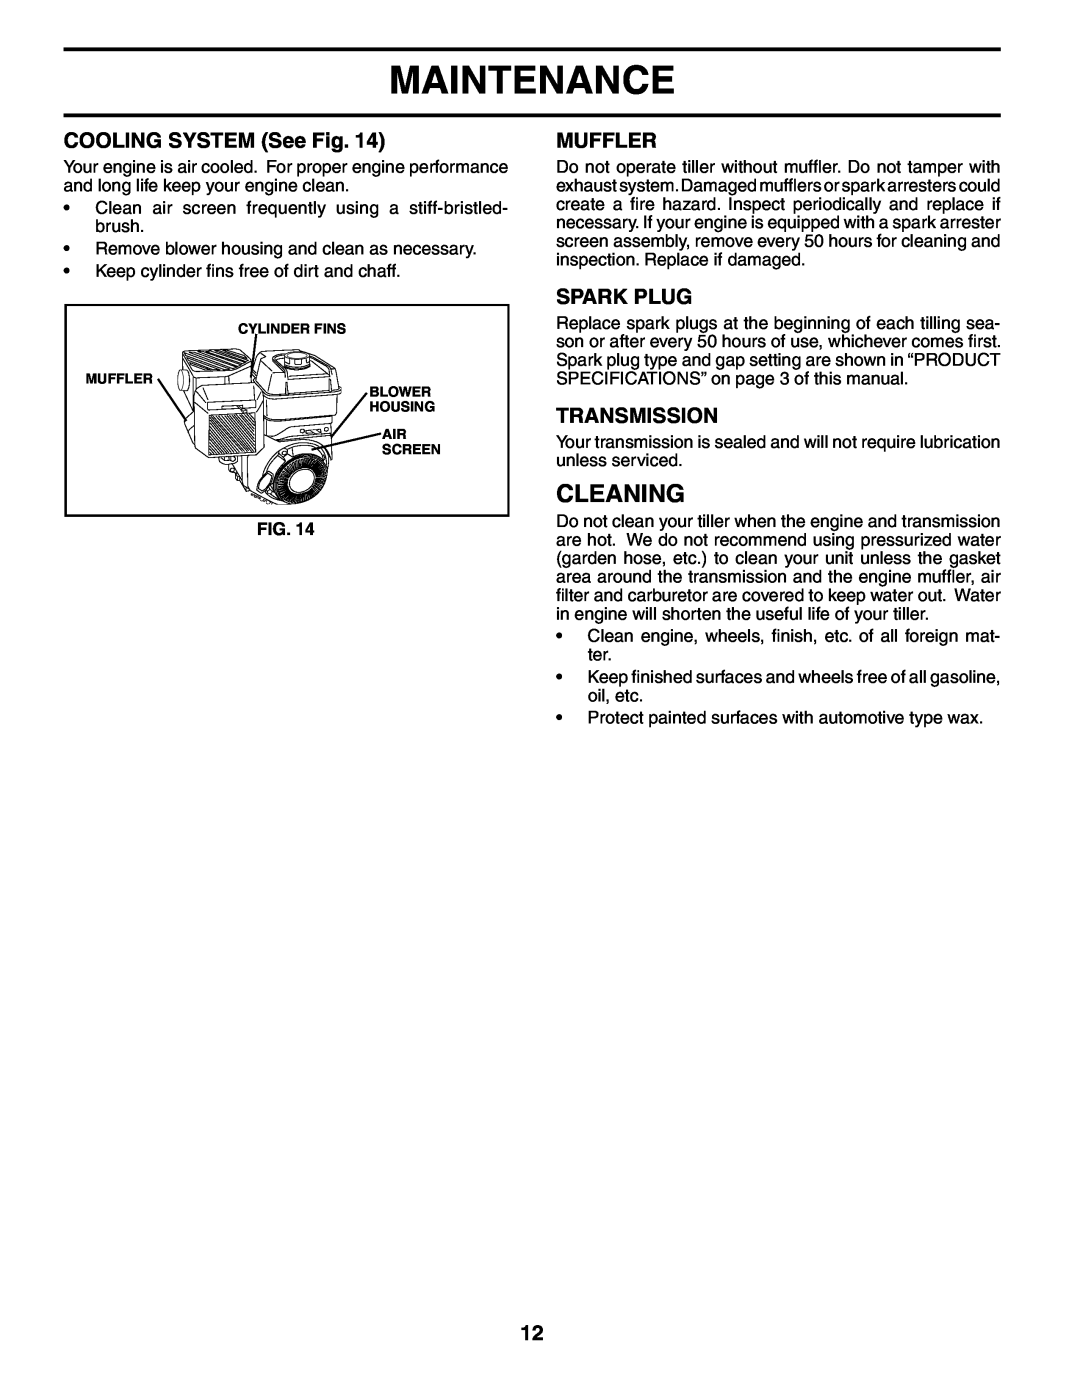 Poulan AGF550A owner manual Cleaning, COOLING SYSTEM See Fig, Muffler, Spark Plug, Transmission, Maintenance 